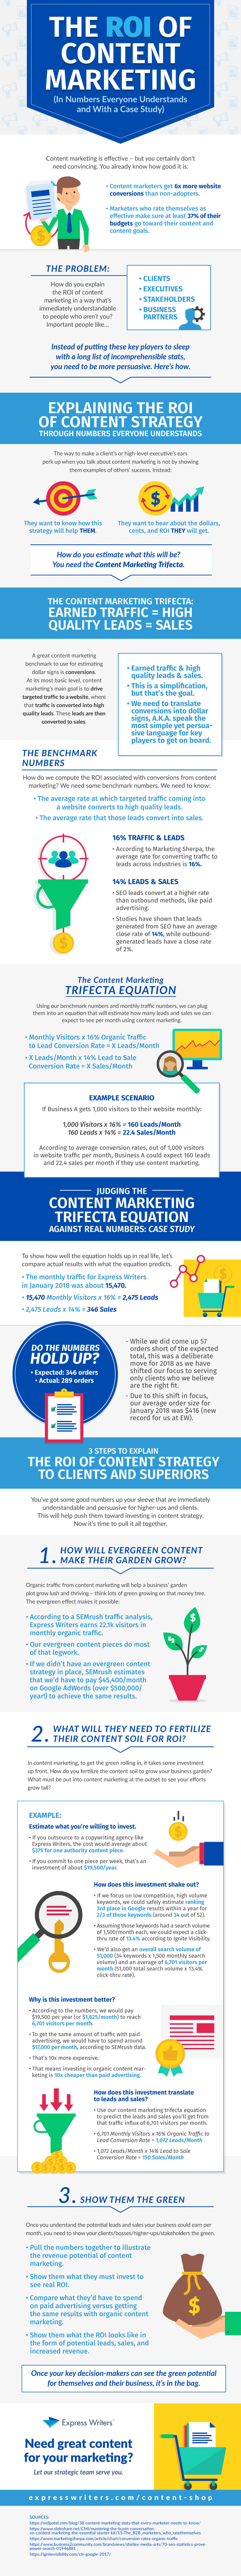 ROI of content marketing infographic